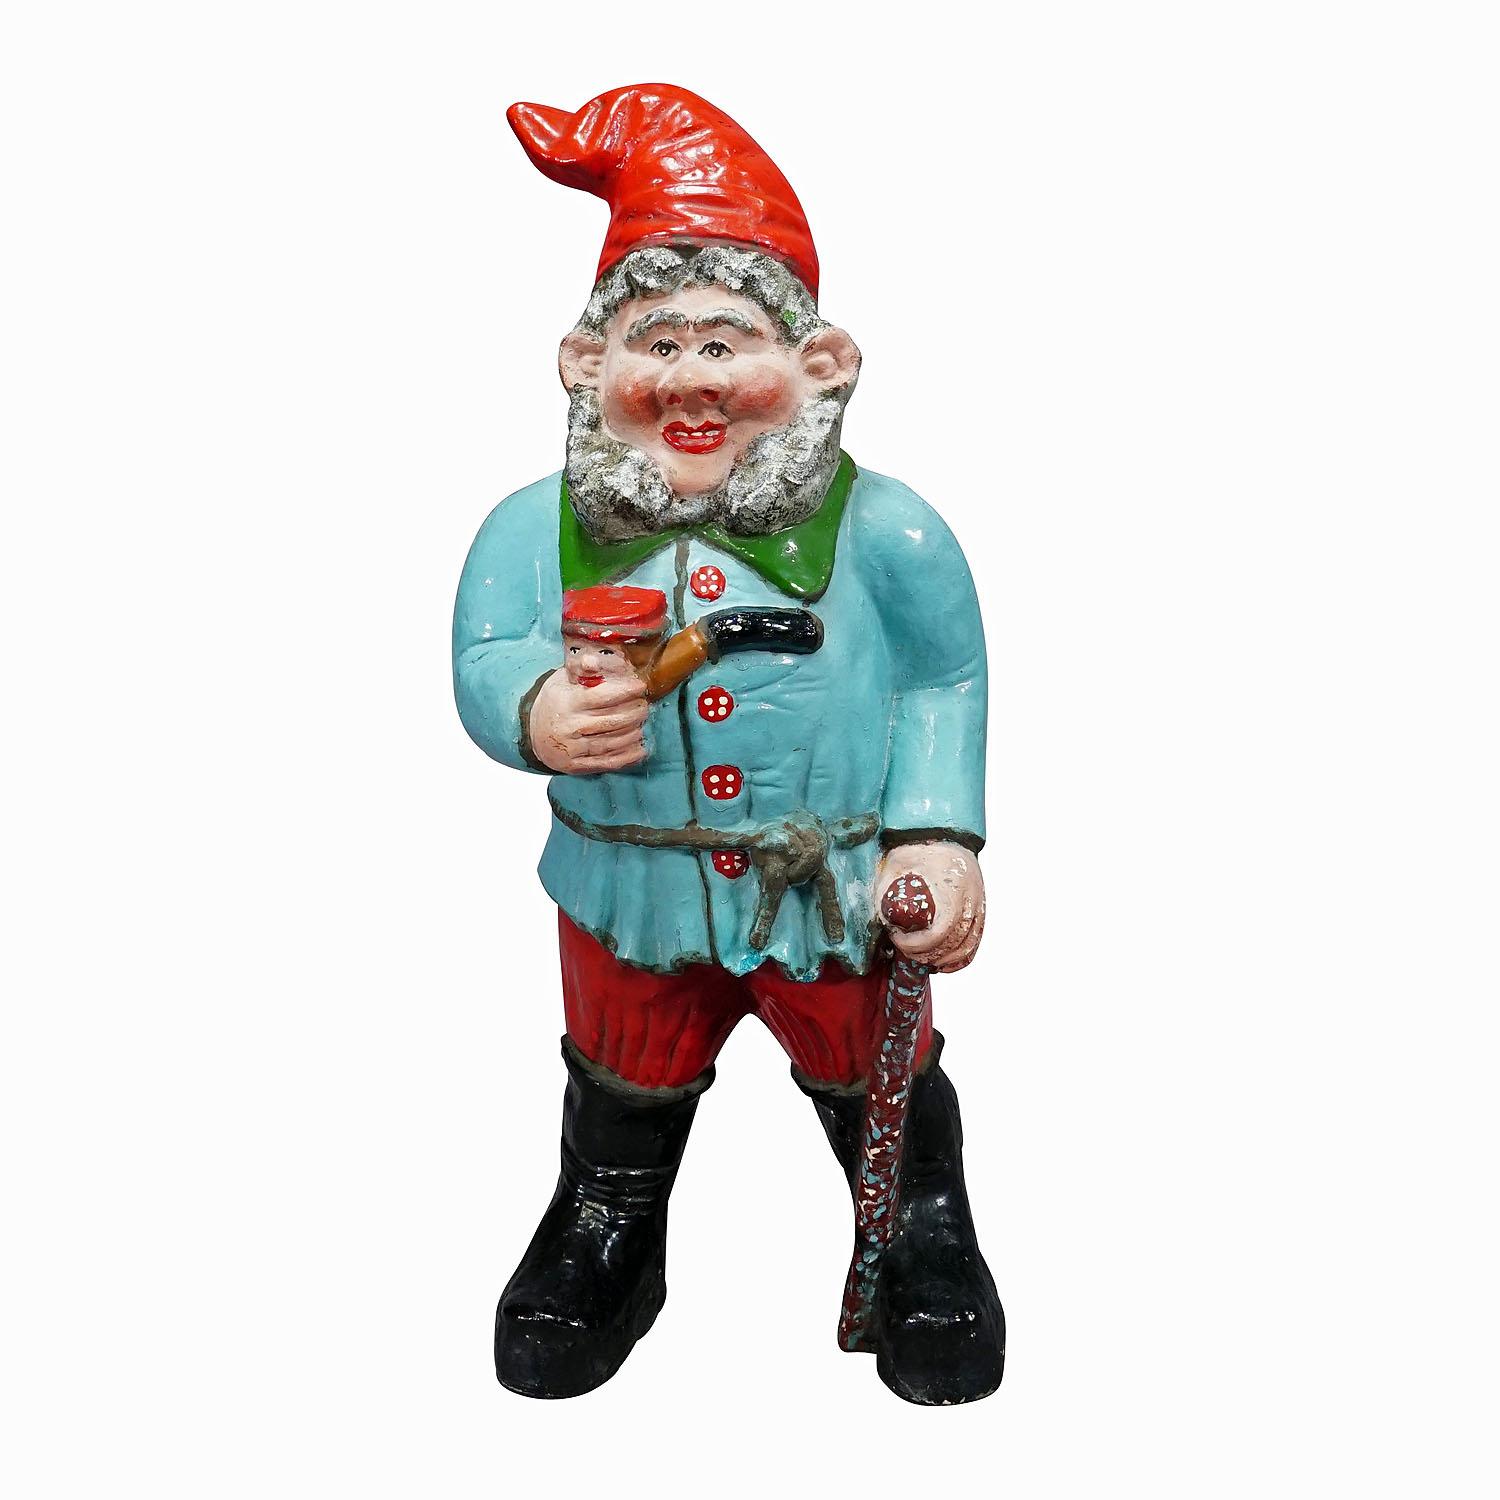 Large Terracotta Garden Gnome with Pipe, Germany ca. 1920s

A large garden gnome from Germany, ca. 1920s. The gnome has a pipe and an walking stick in his hands. Good used vintage condition with signs of wear commensurate with age. Some rubbed areas